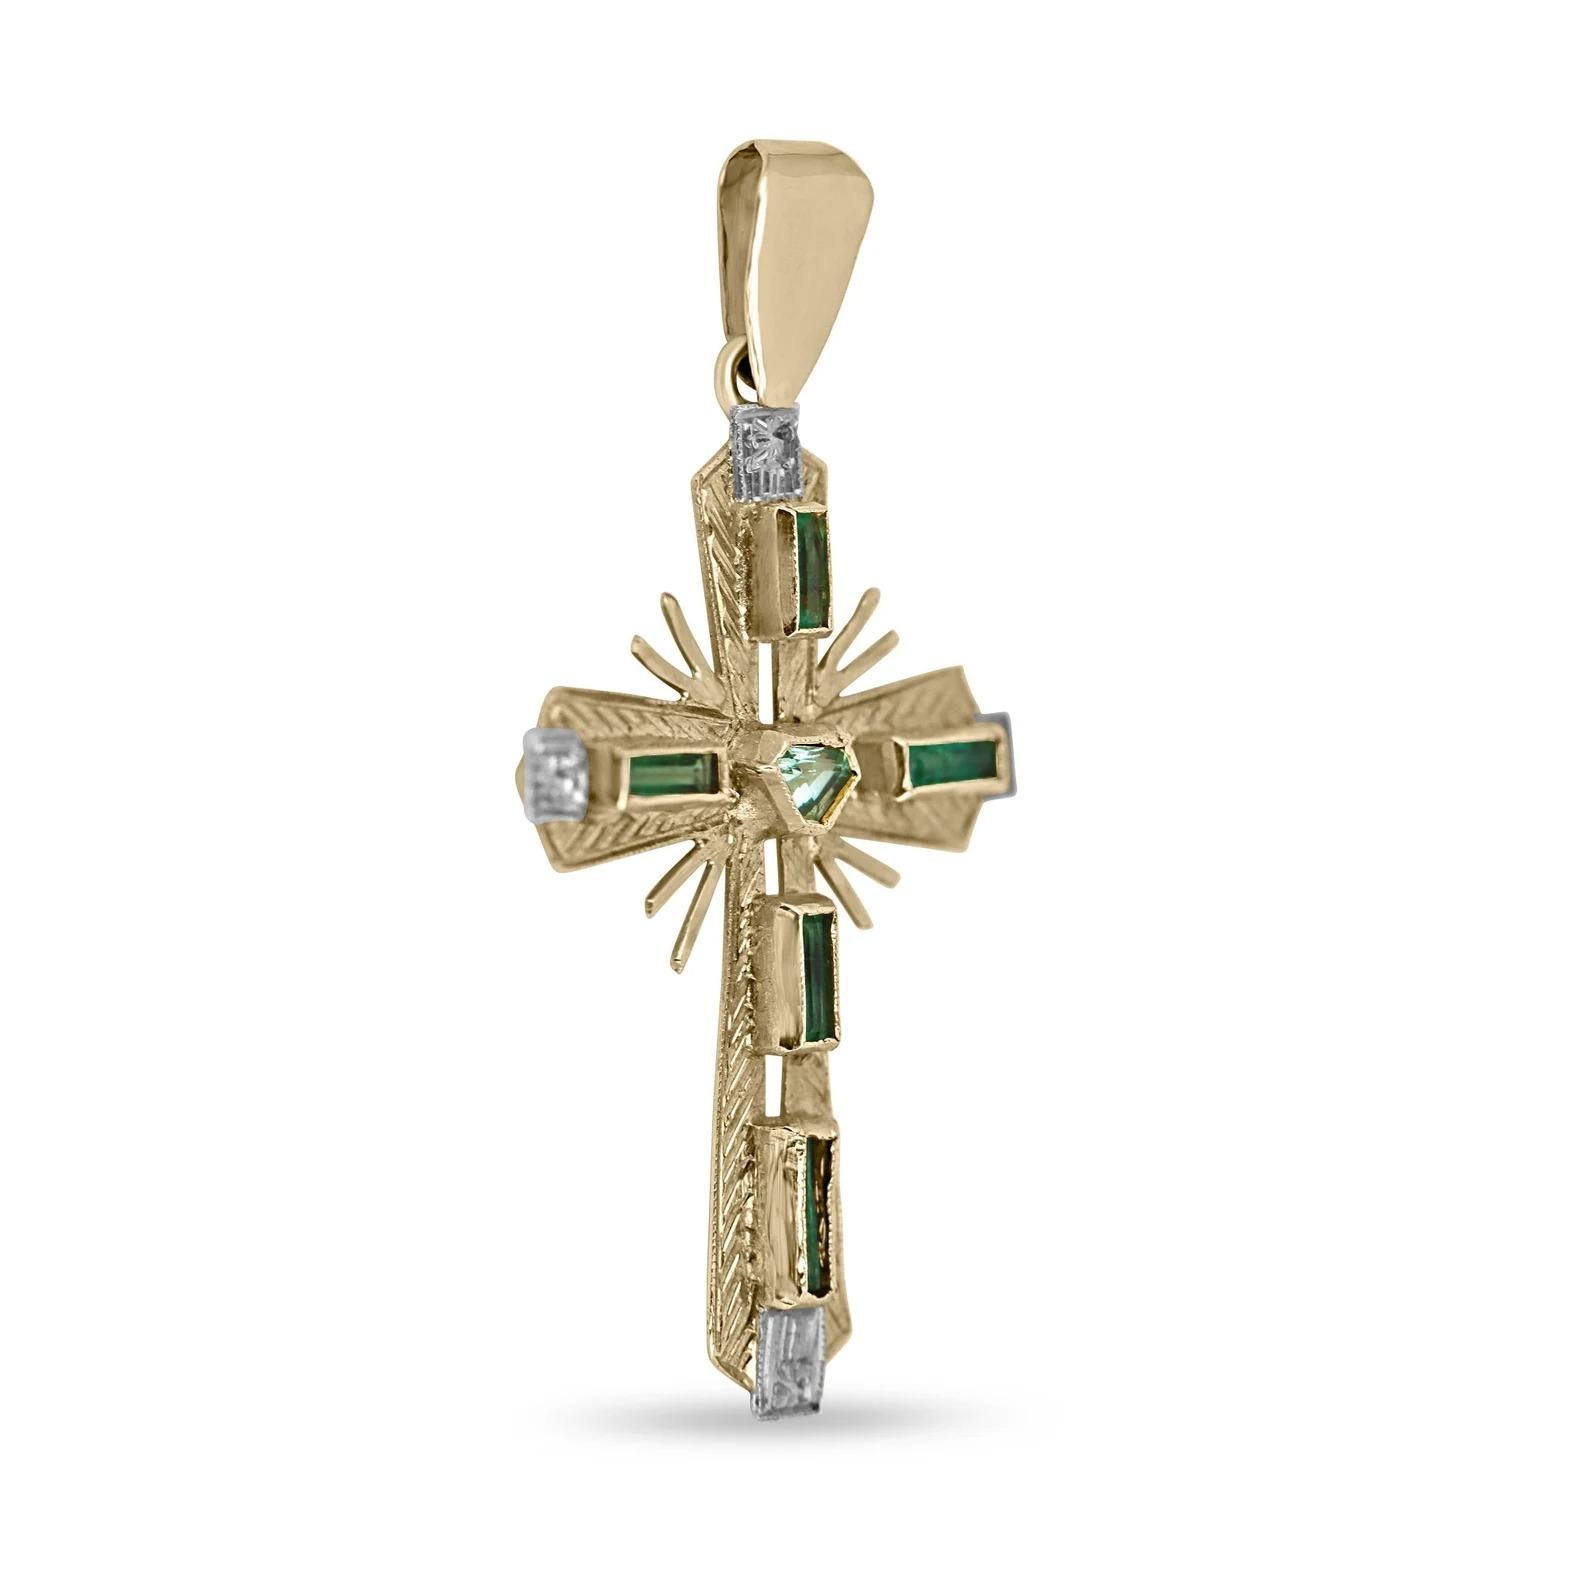 A remarkable, and unique natural emerald cross. This piece features four different baguette-cut emeralds with a medium dark green color and good luster, as well as an irregular trillion cut in the center with a desirable spring green color and very